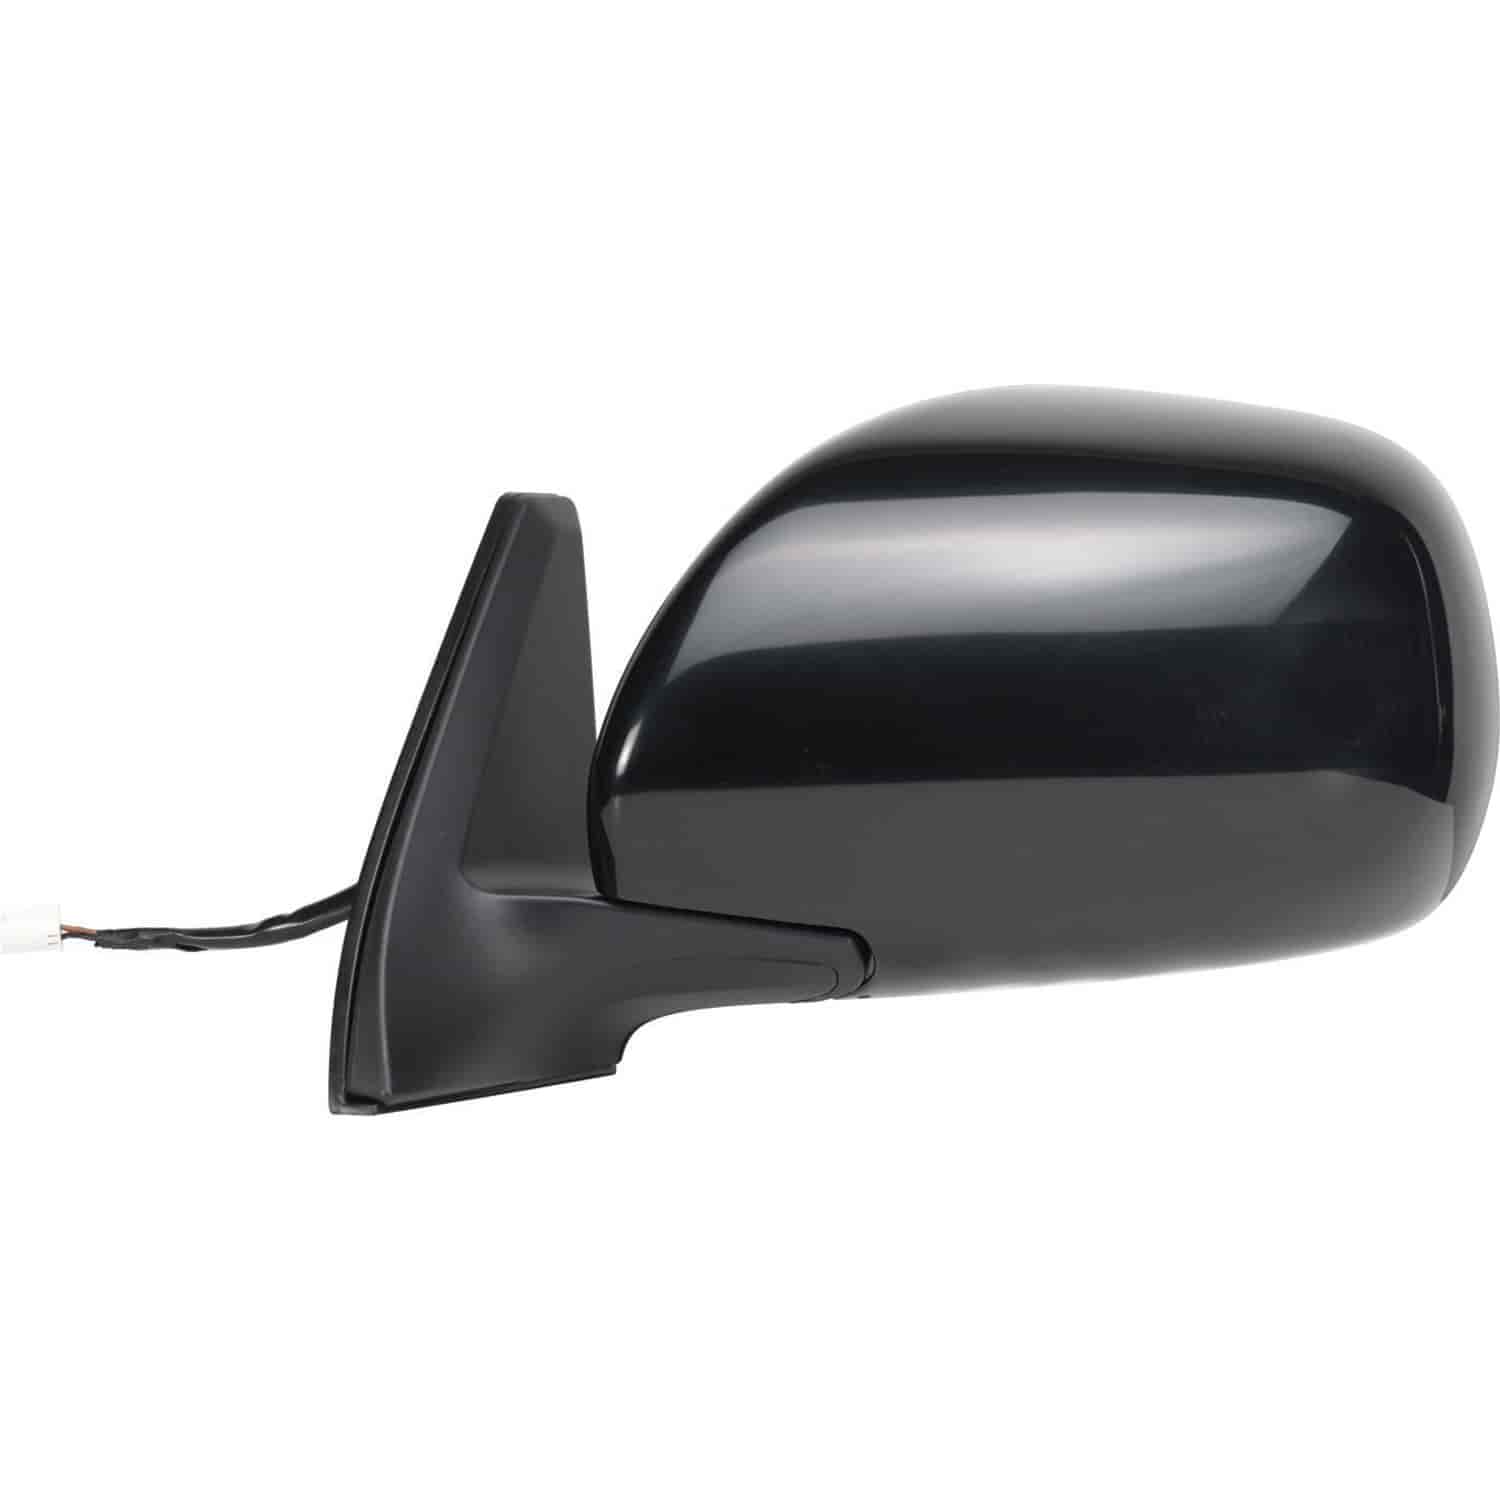 OEM Style Replacement mirror for 03-09 Toyota 4runner driver side mirror tested to fit and function